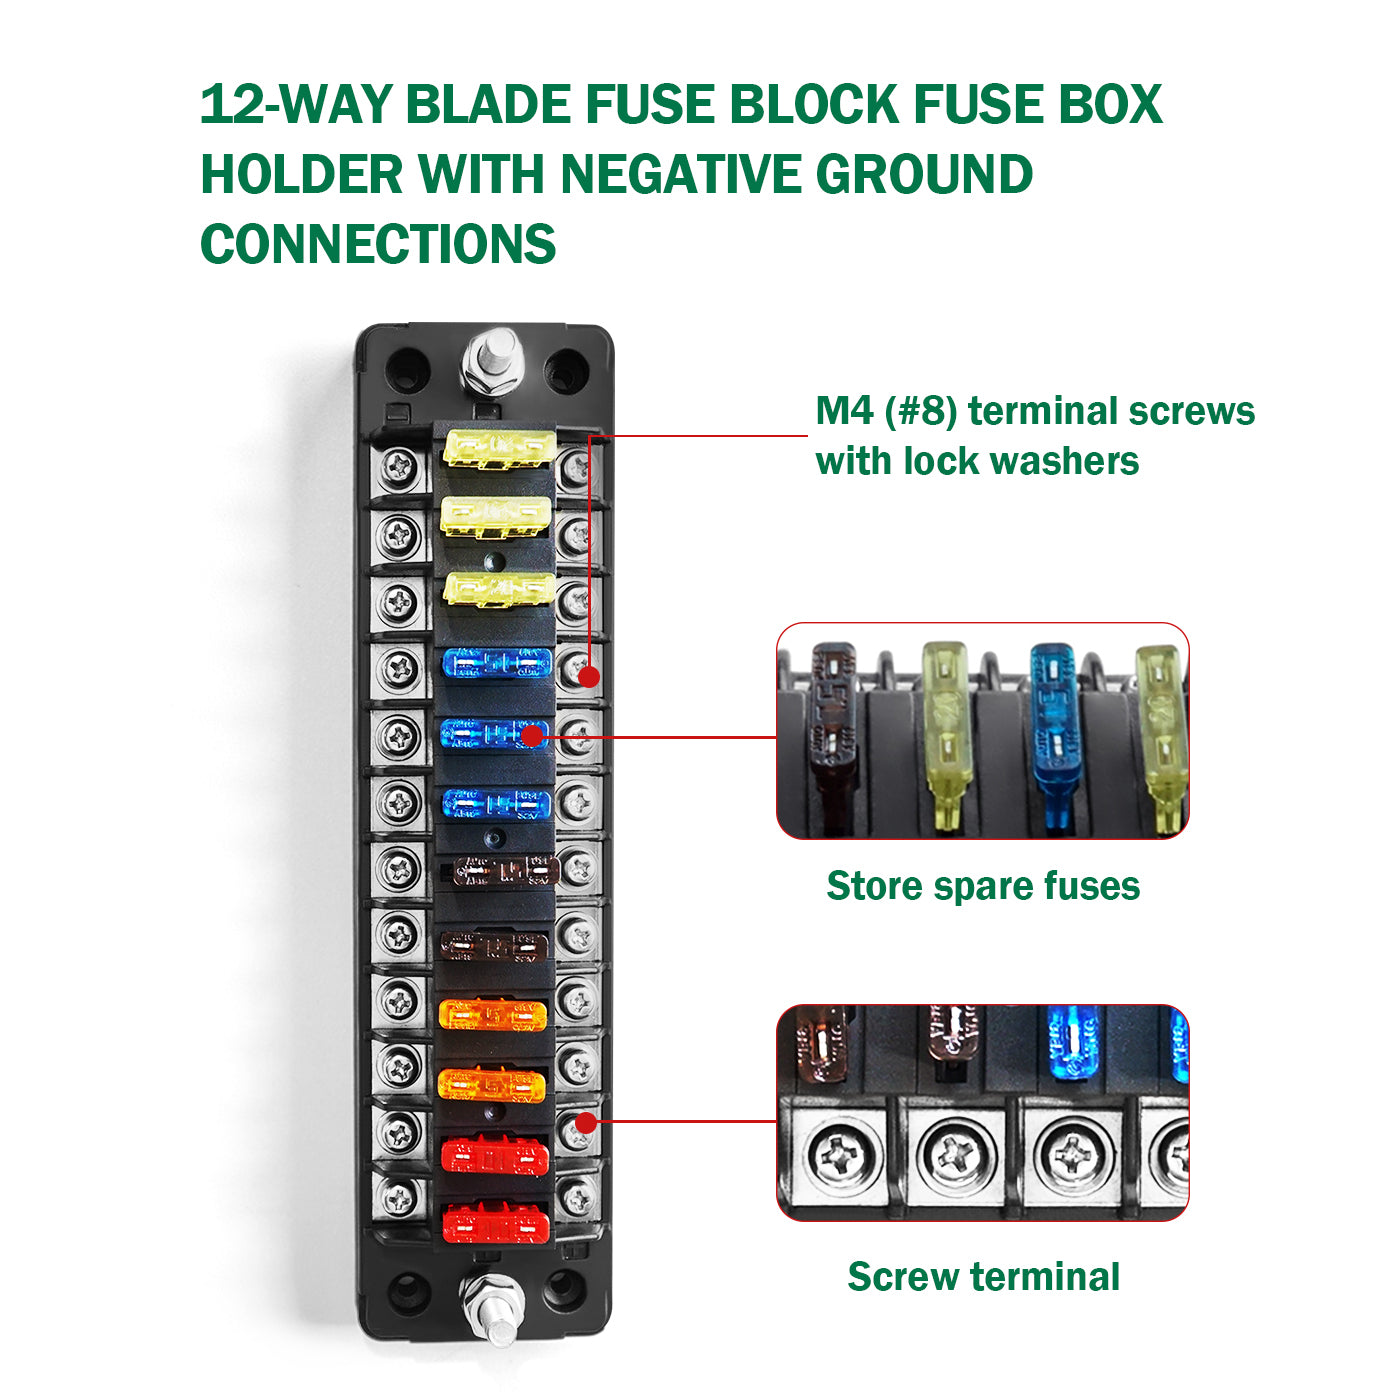 LENKRAD 12 Way Fuse Block Blade Fuse Box with LED Warning Indicator, 12 Circuits ATC/ATO with Negative Bus, Protection Cover, Bolt Connect Terminals, Sticker Labels for Car Marine RV Truck - THALASSA